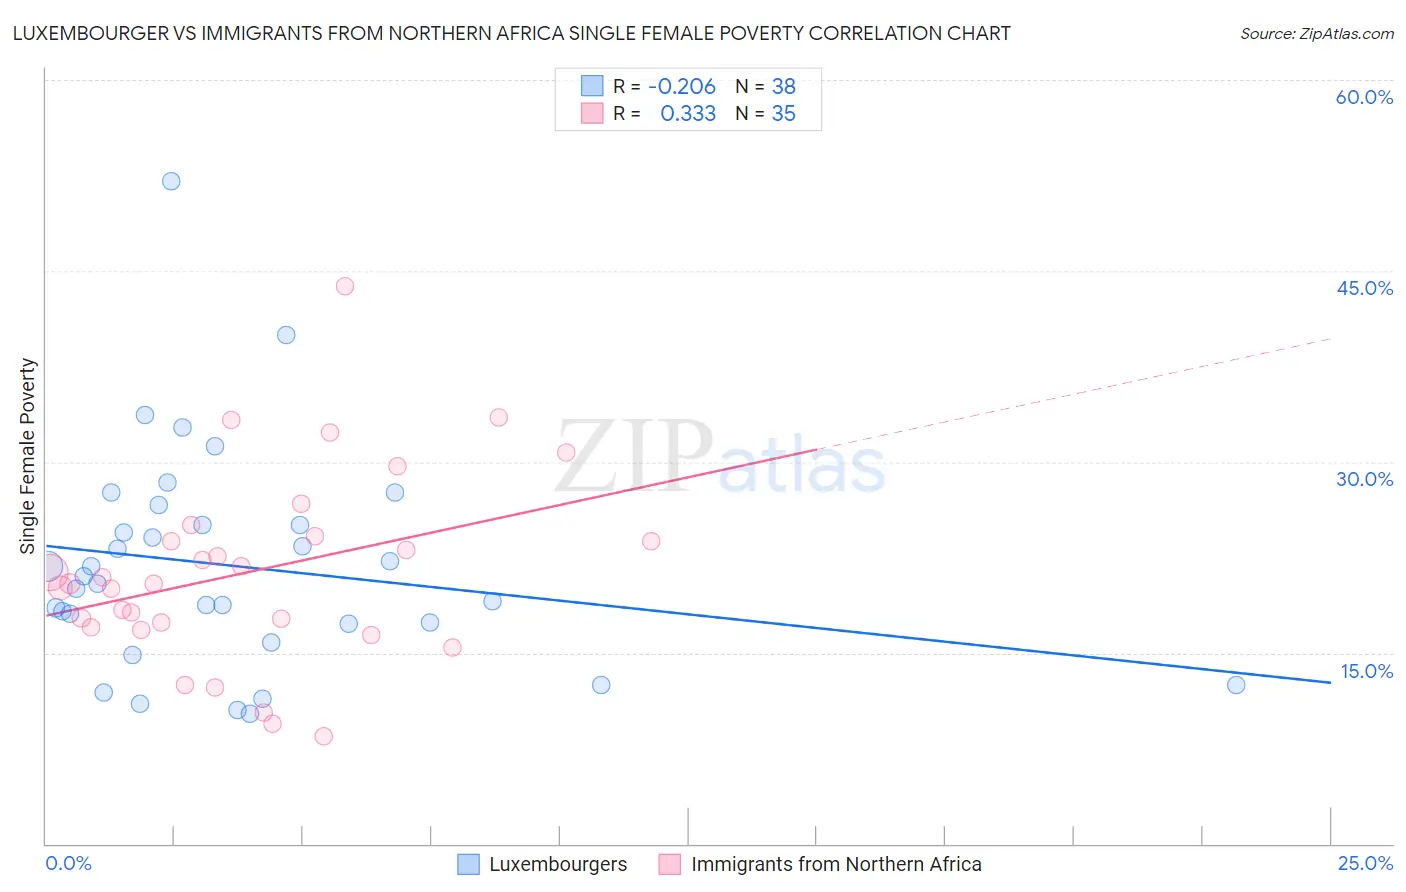 Luxembourger vs Immigrants from Northern Africa Single Female Poverty